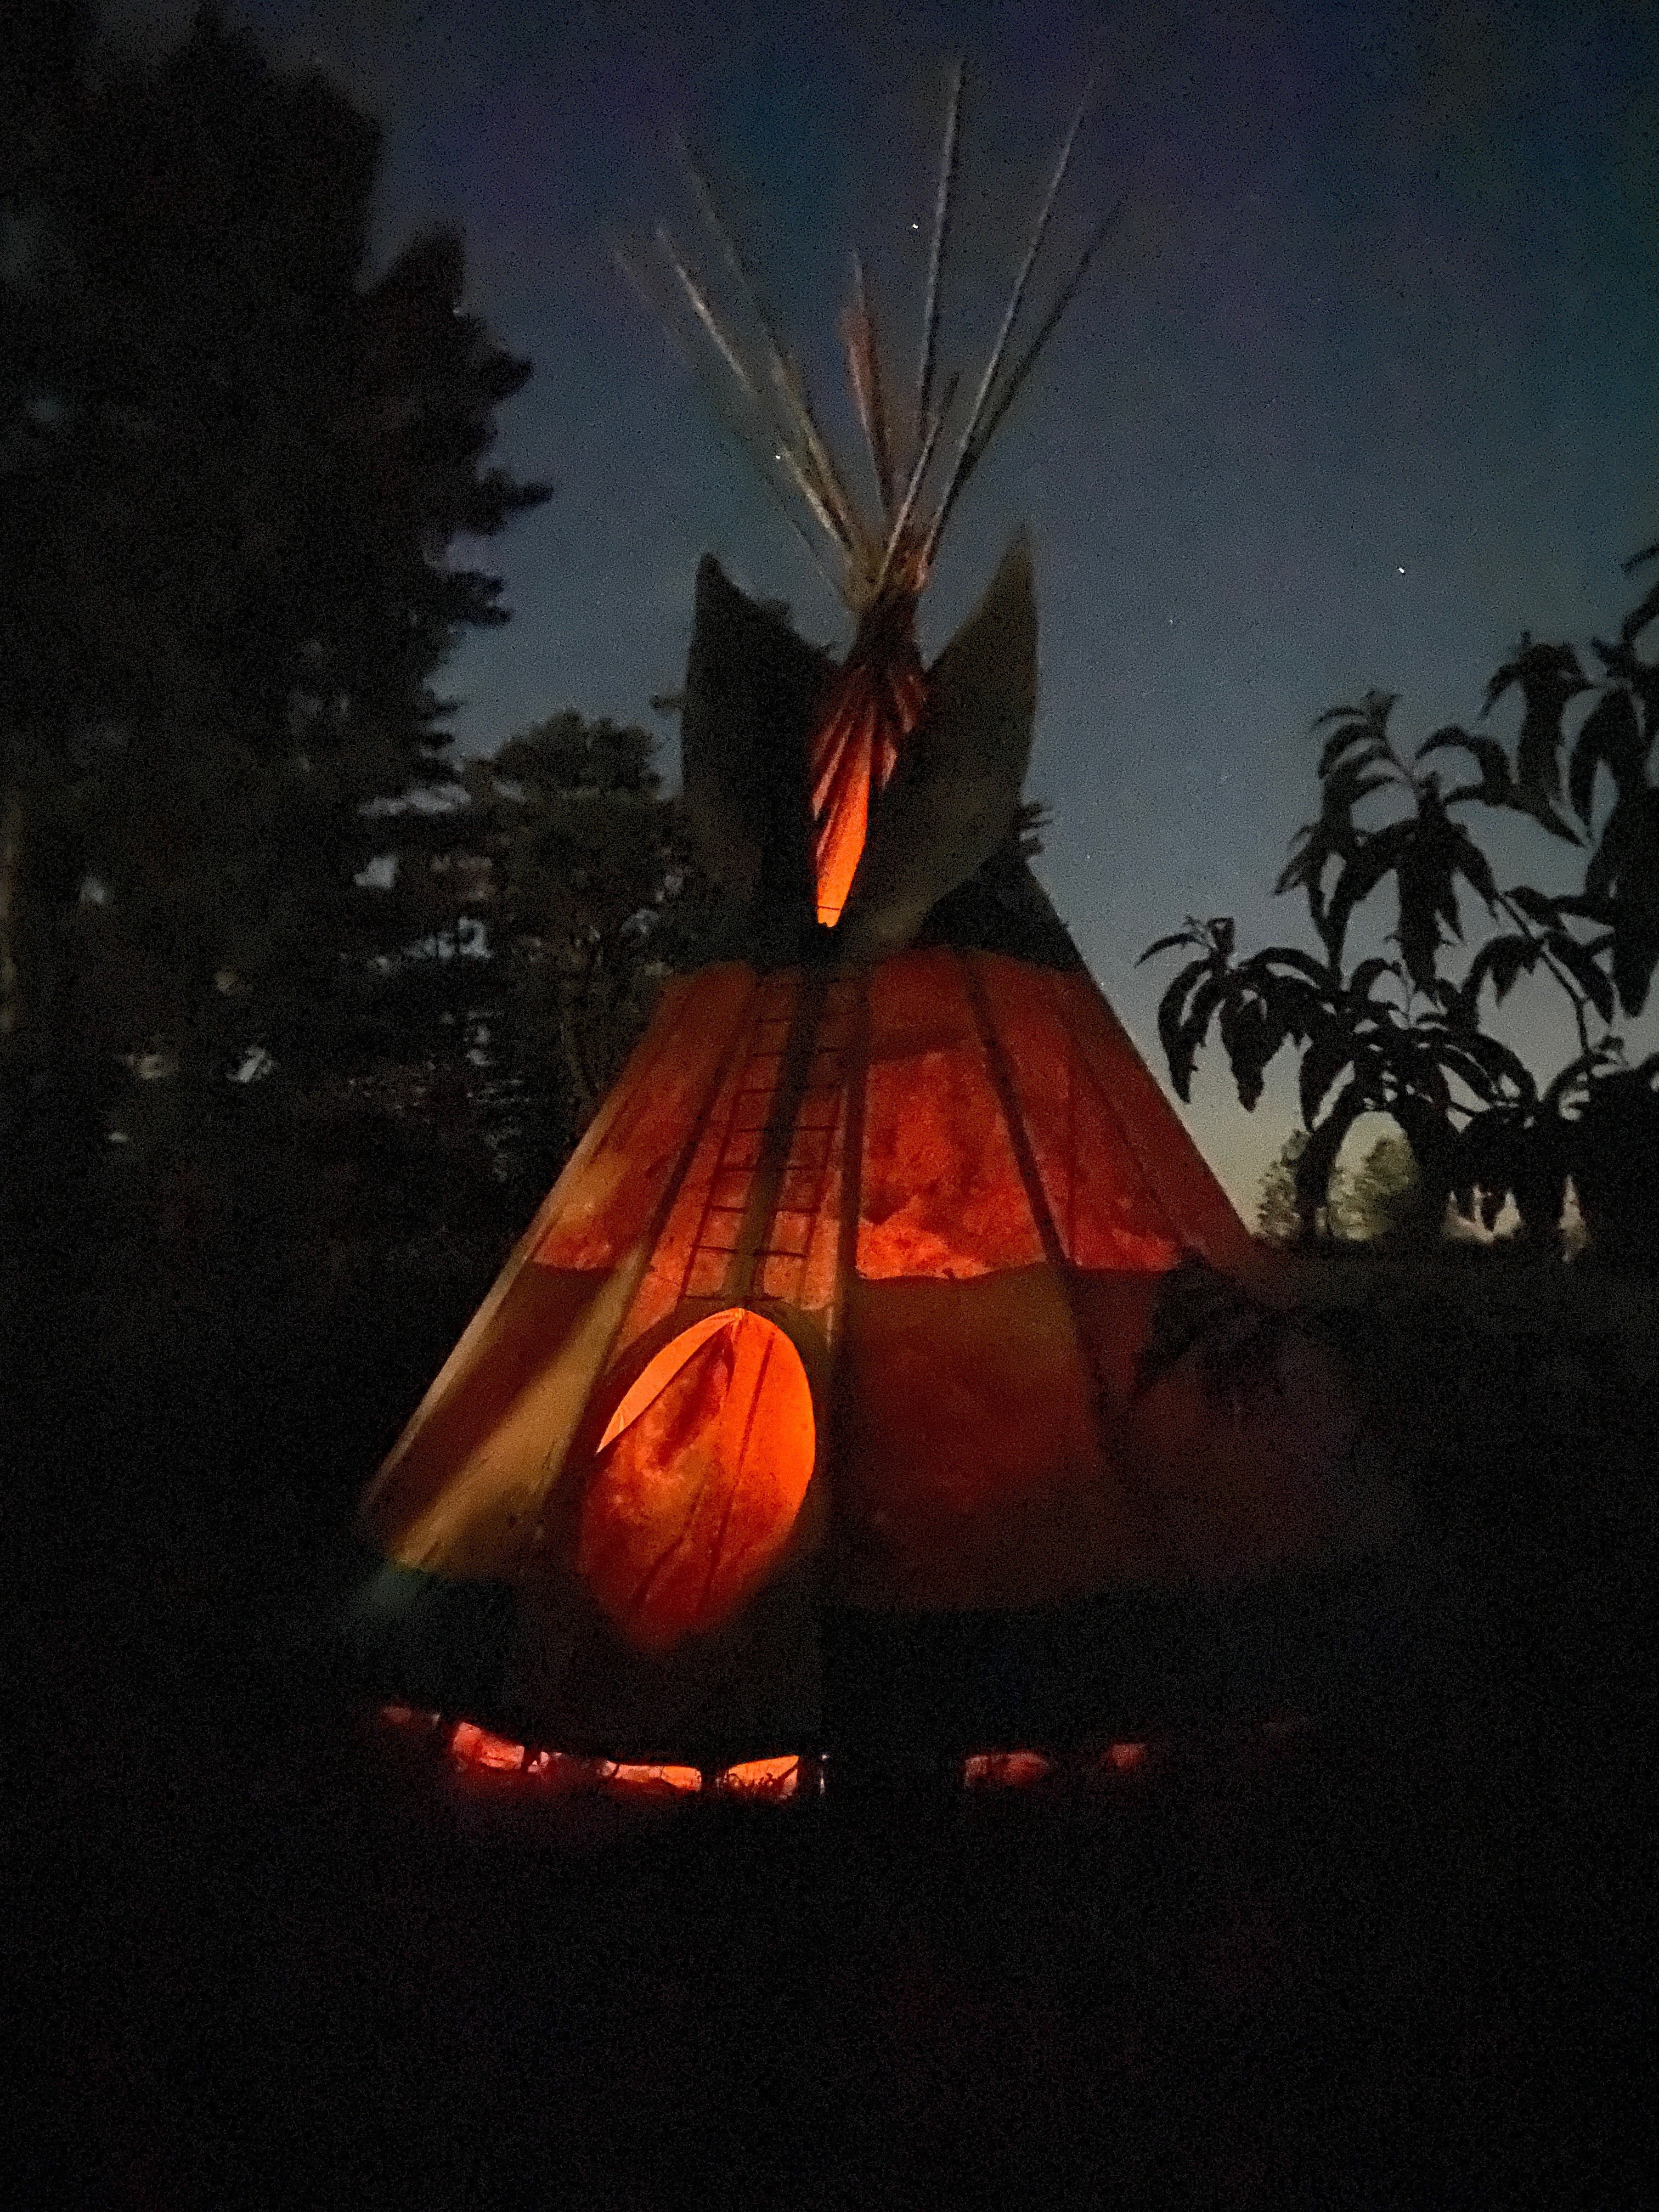 Campers are free to have a fire in the tipi in the fire ring provided.